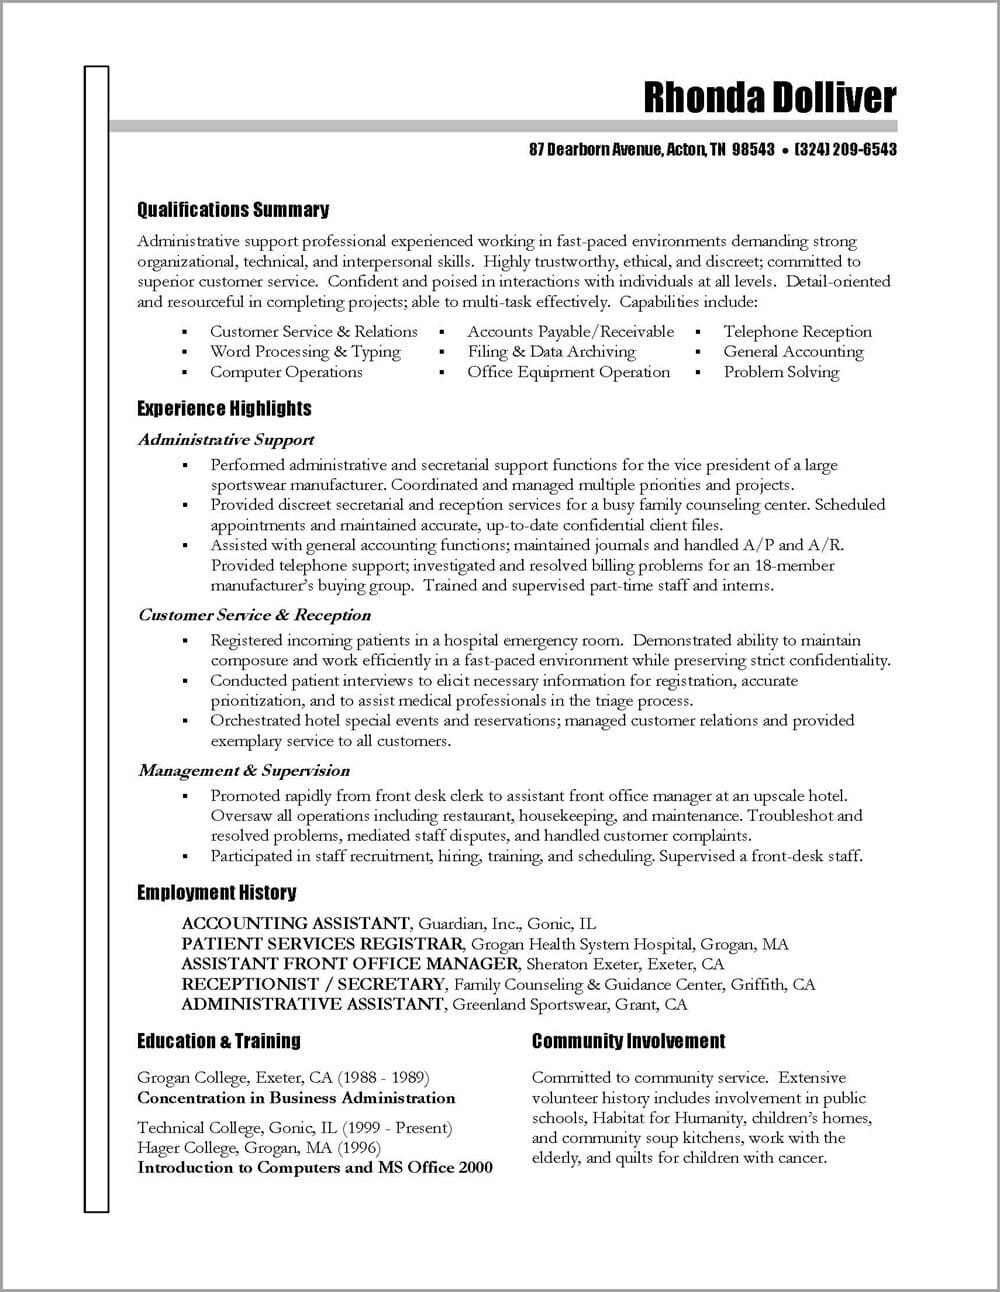 Sample Functional Resume for Administrative assistant Administrative assistant Resume – Distinctive Career Services